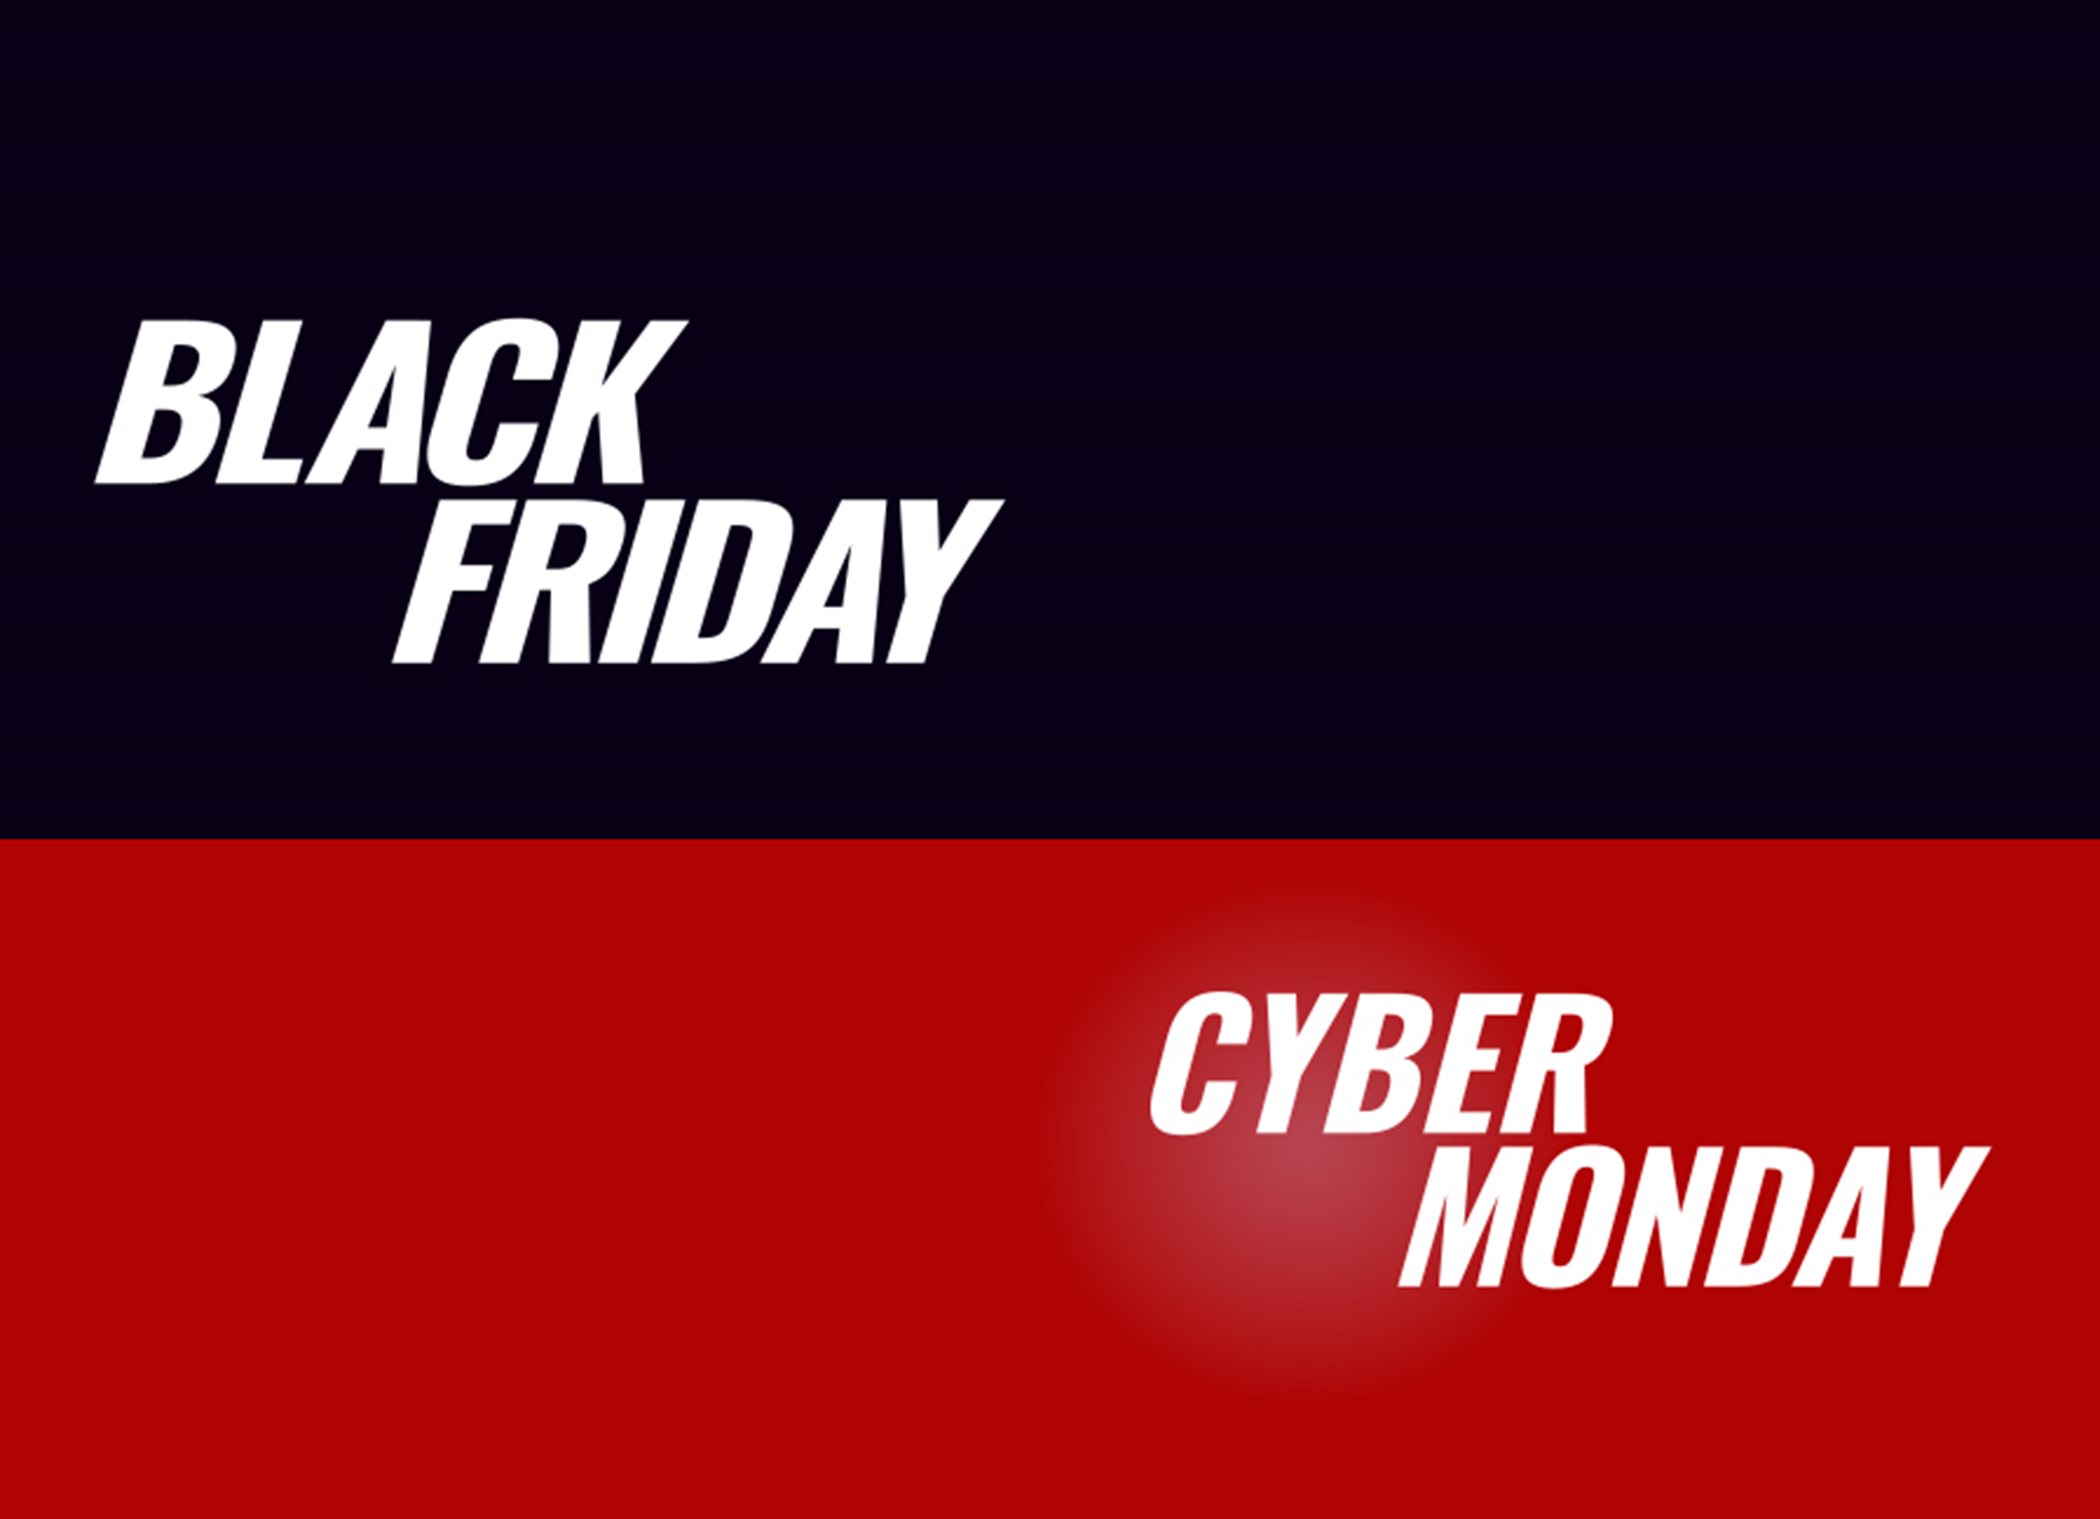 Black Friday and Cyber Monday Promo